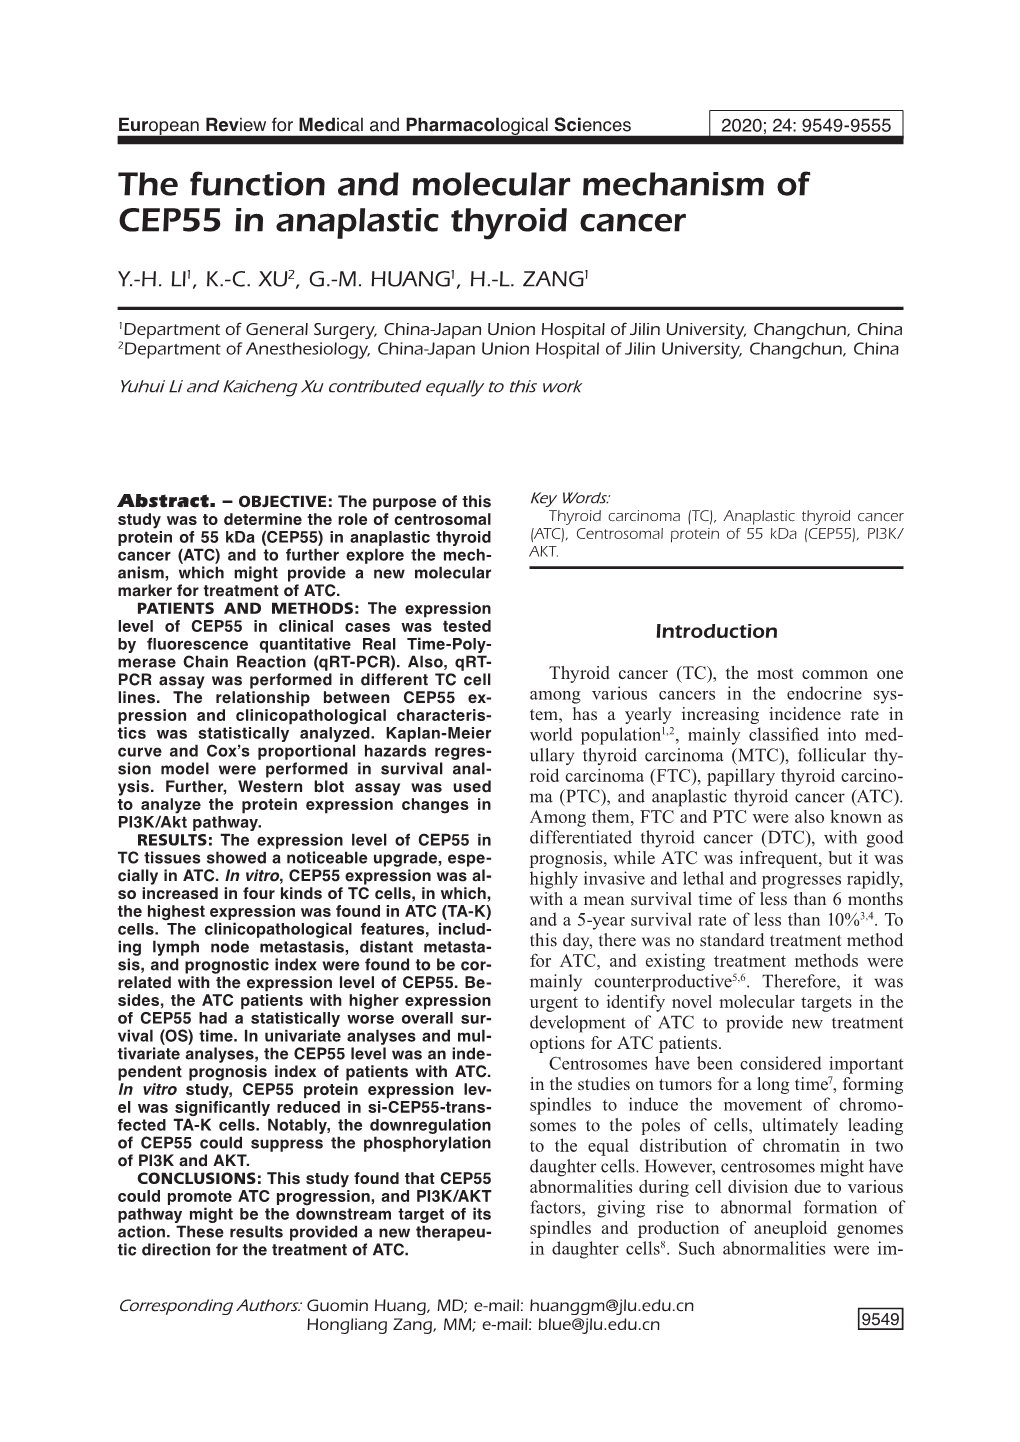 The Function and Molecular Mechanism of CEP55 in Anaplastic Thyroid Cancer